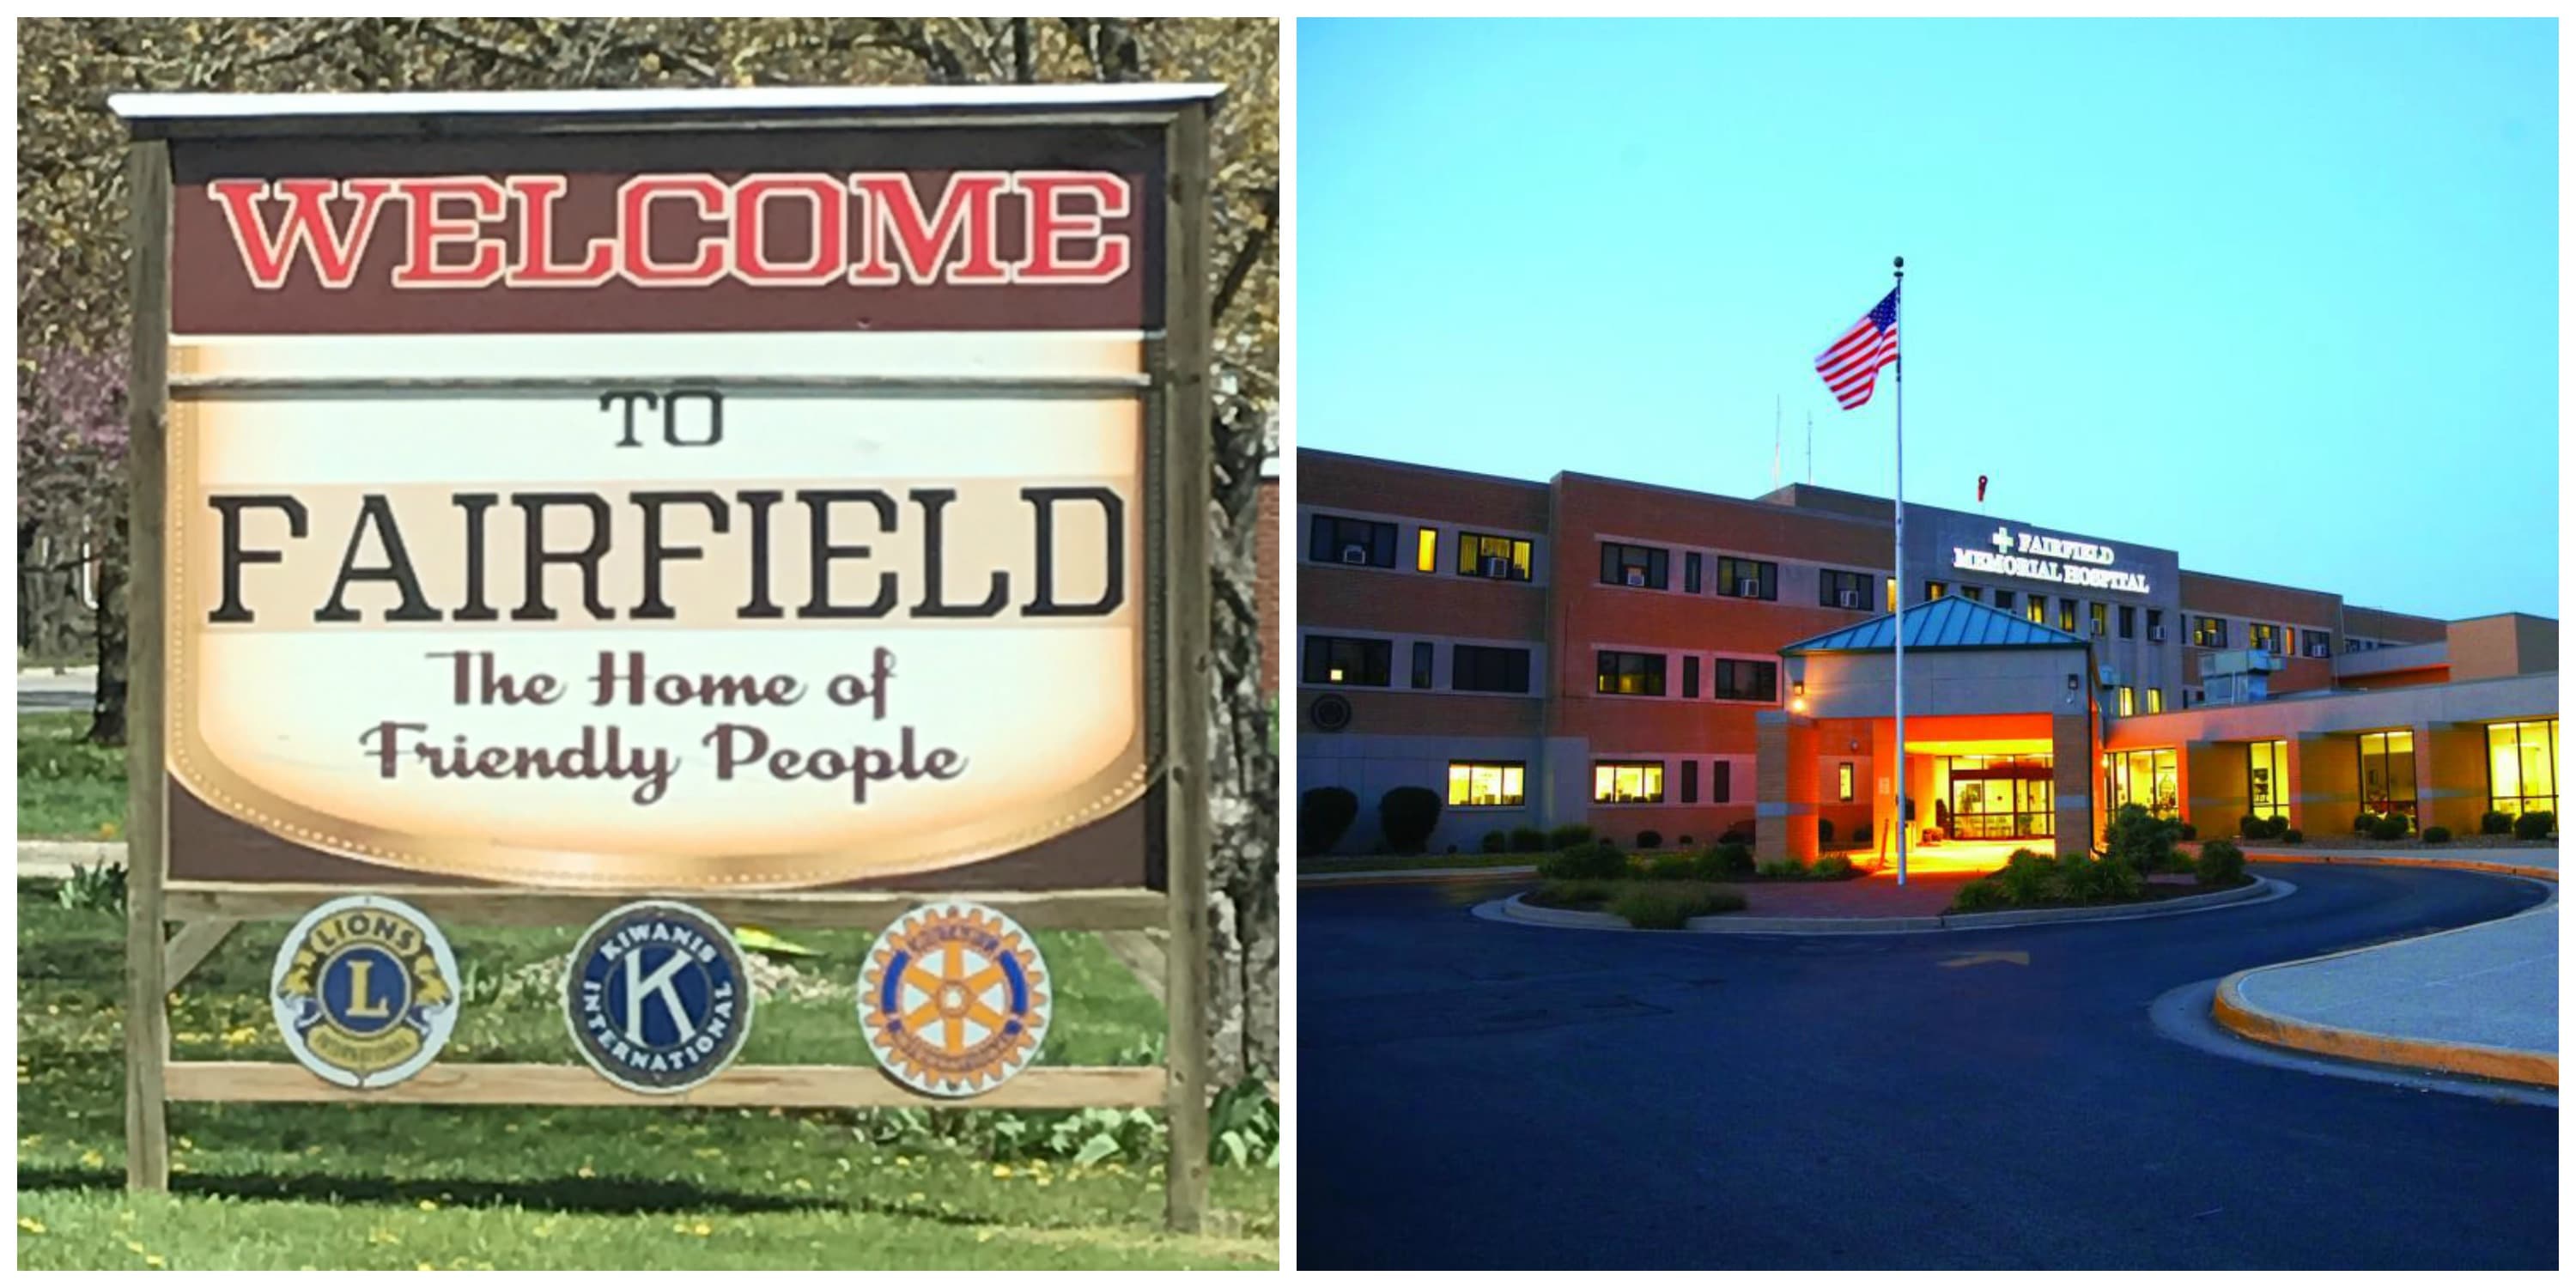 On the right is a Welcome sign for Fairfield reading "The home of friendly people." On the right is an evening exterior view of the Fairfield Memorial Hospital.